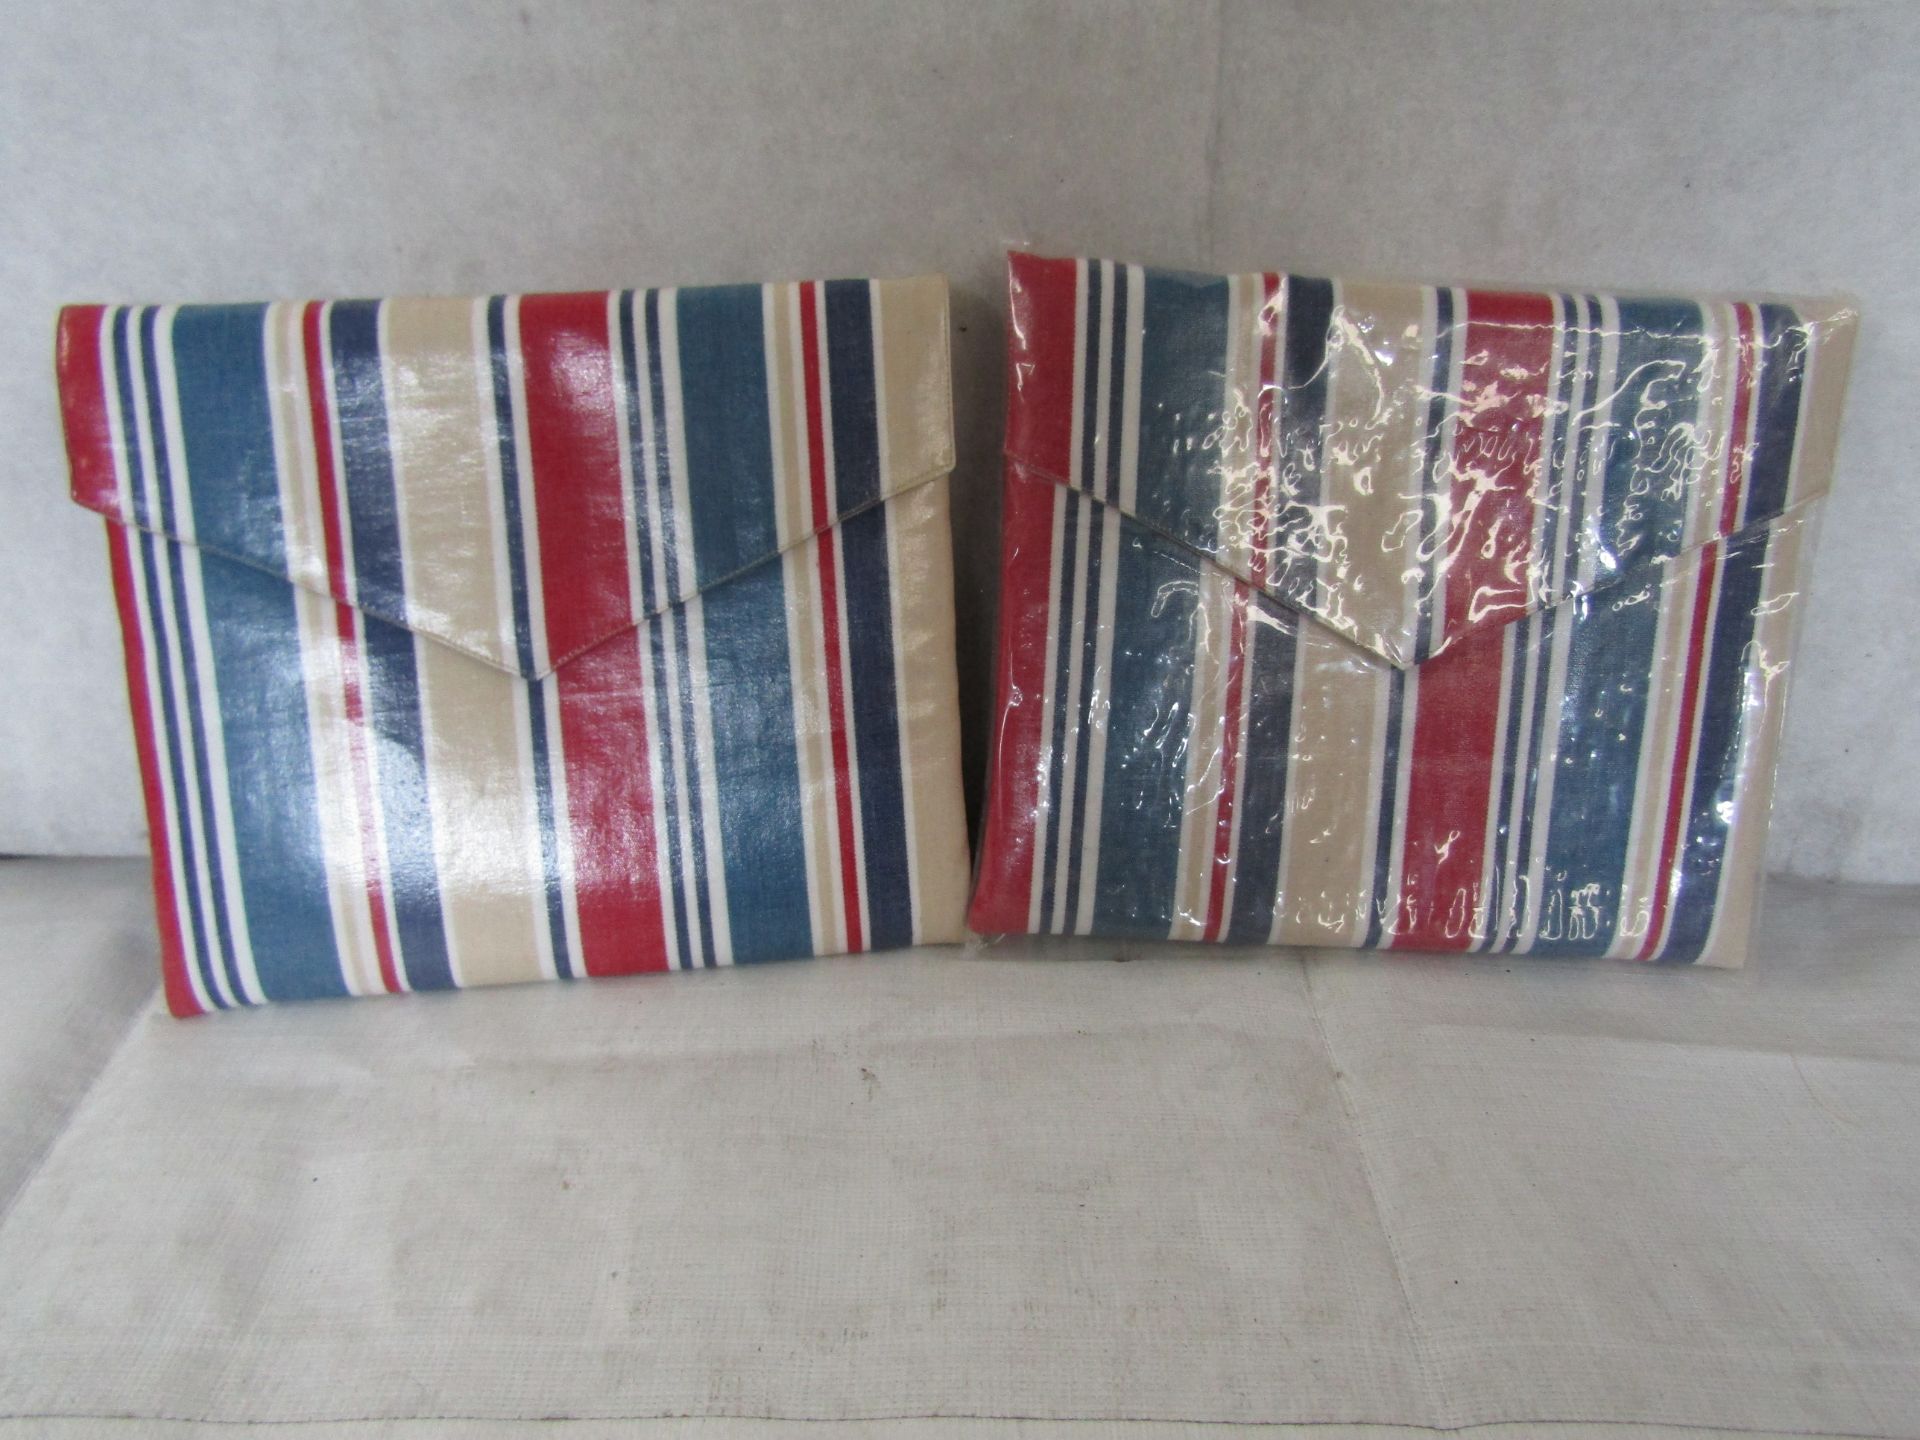 2X TheStripesCompany - PVC Clutch Purse Large - See Image For Design - New & Packaged.